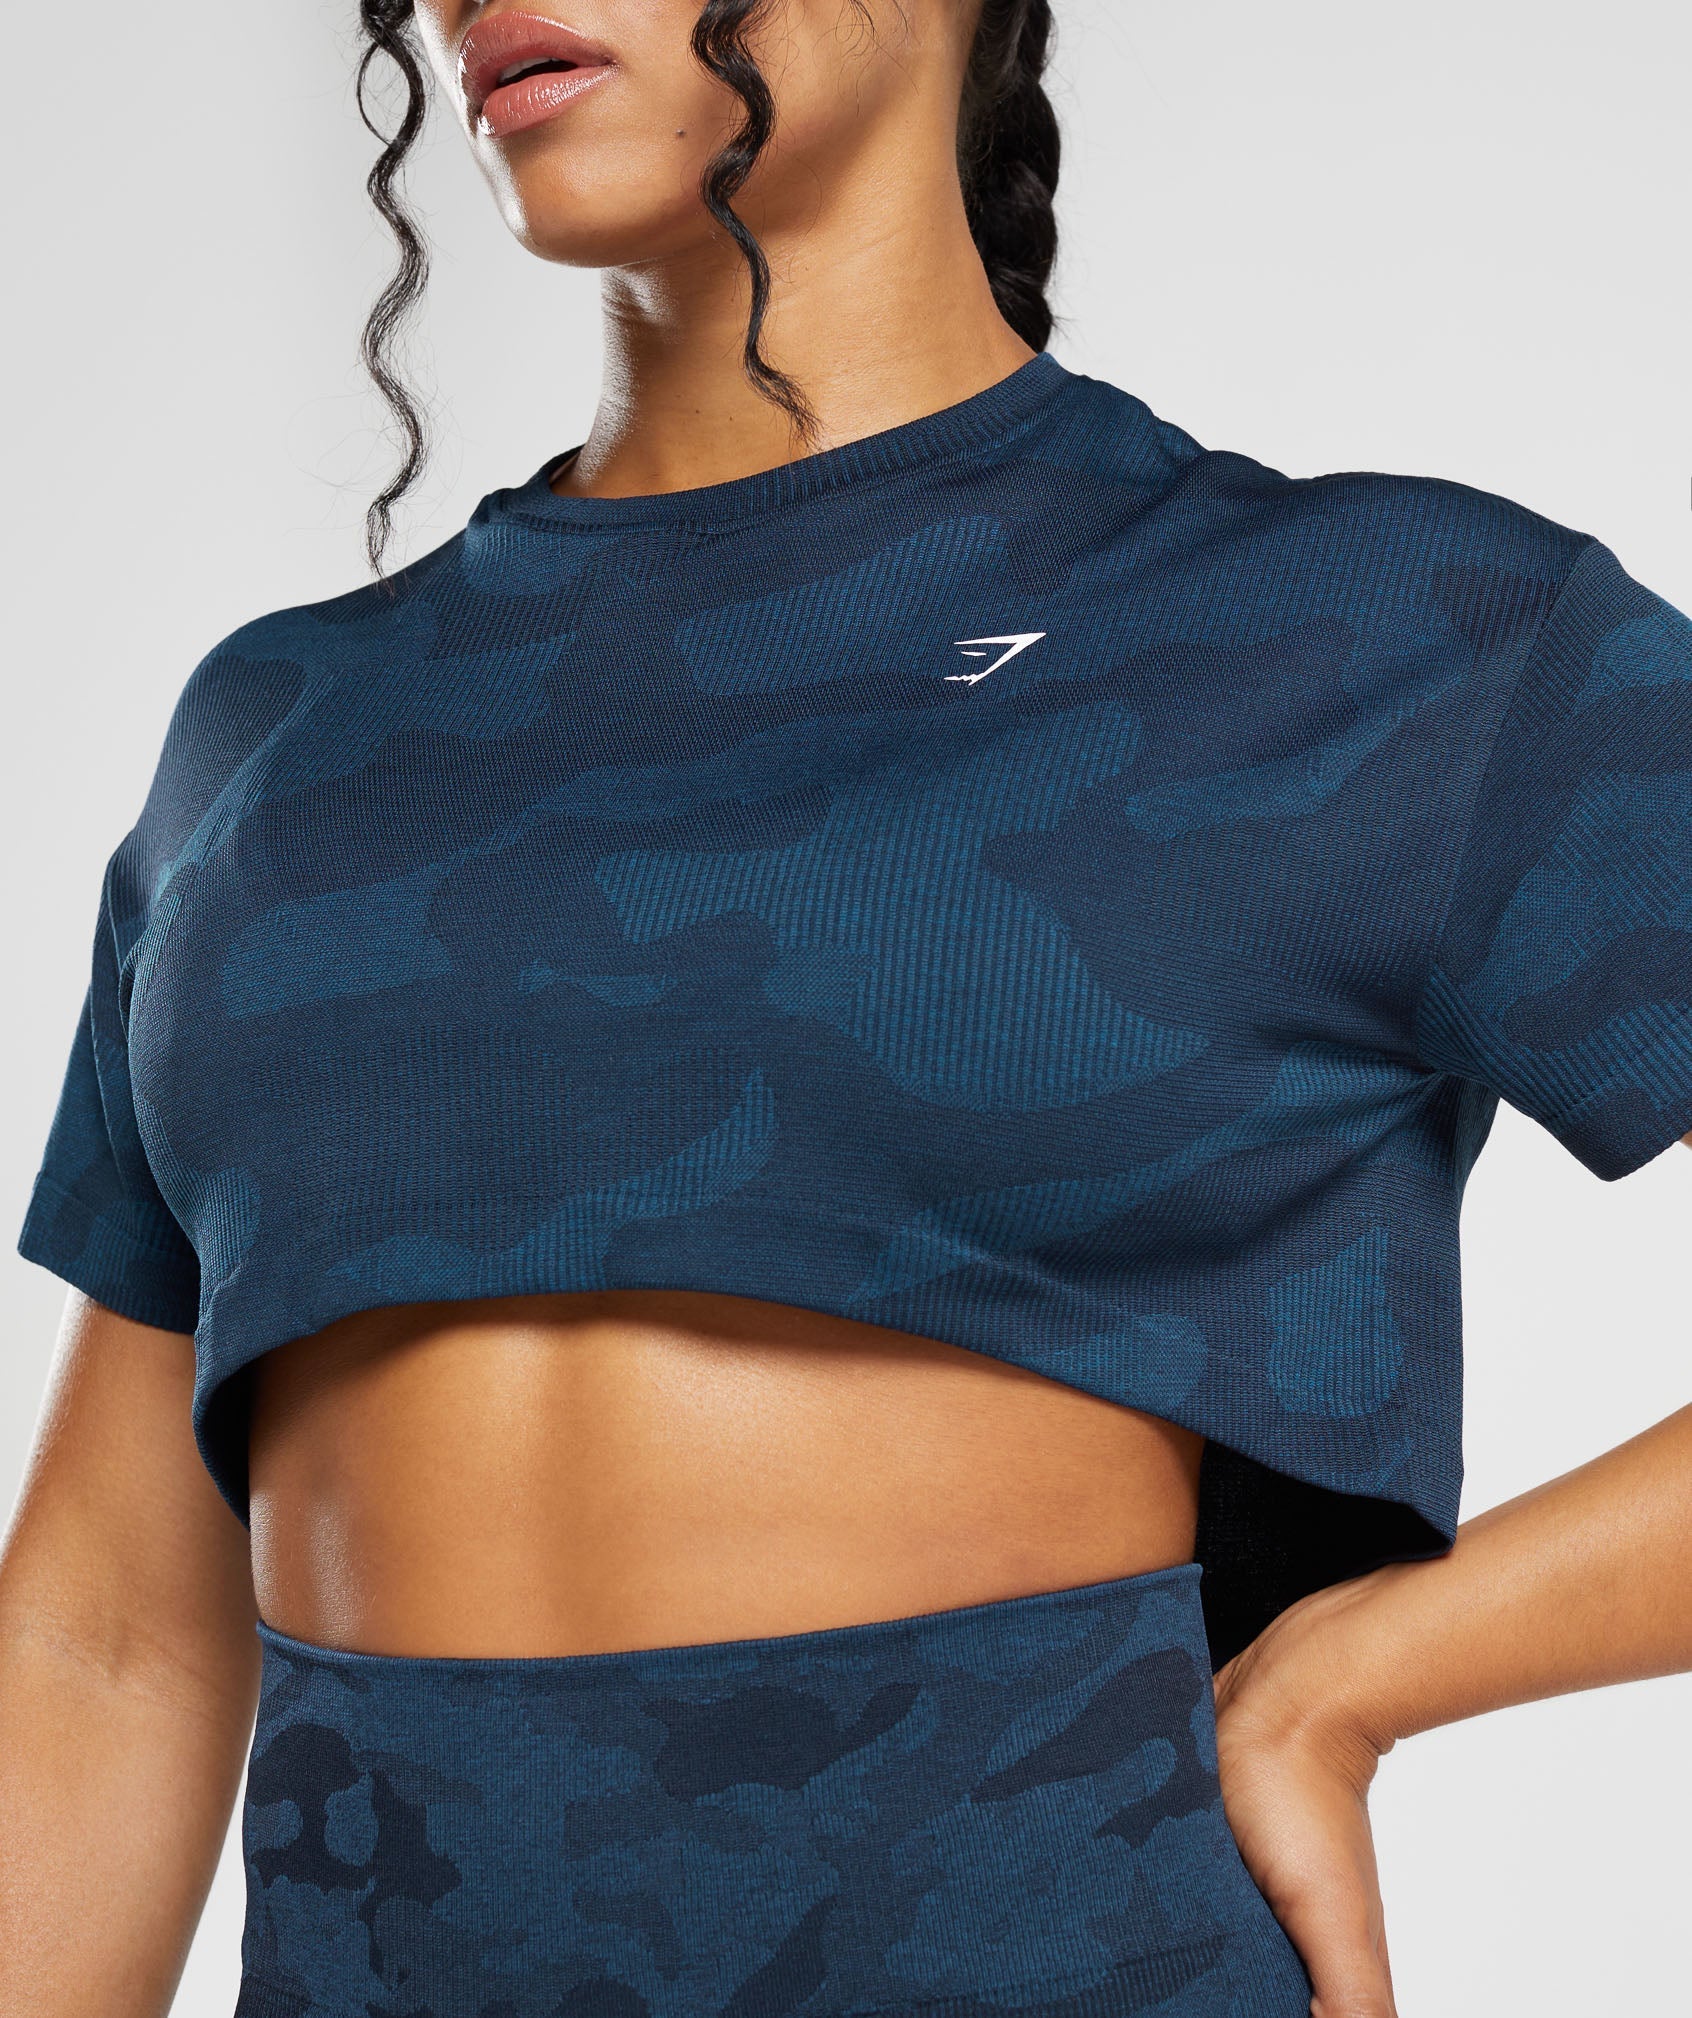 Adapt Camo Seamless Ribbed Crop Top in Midnight Blue/Ash Blue - view 5